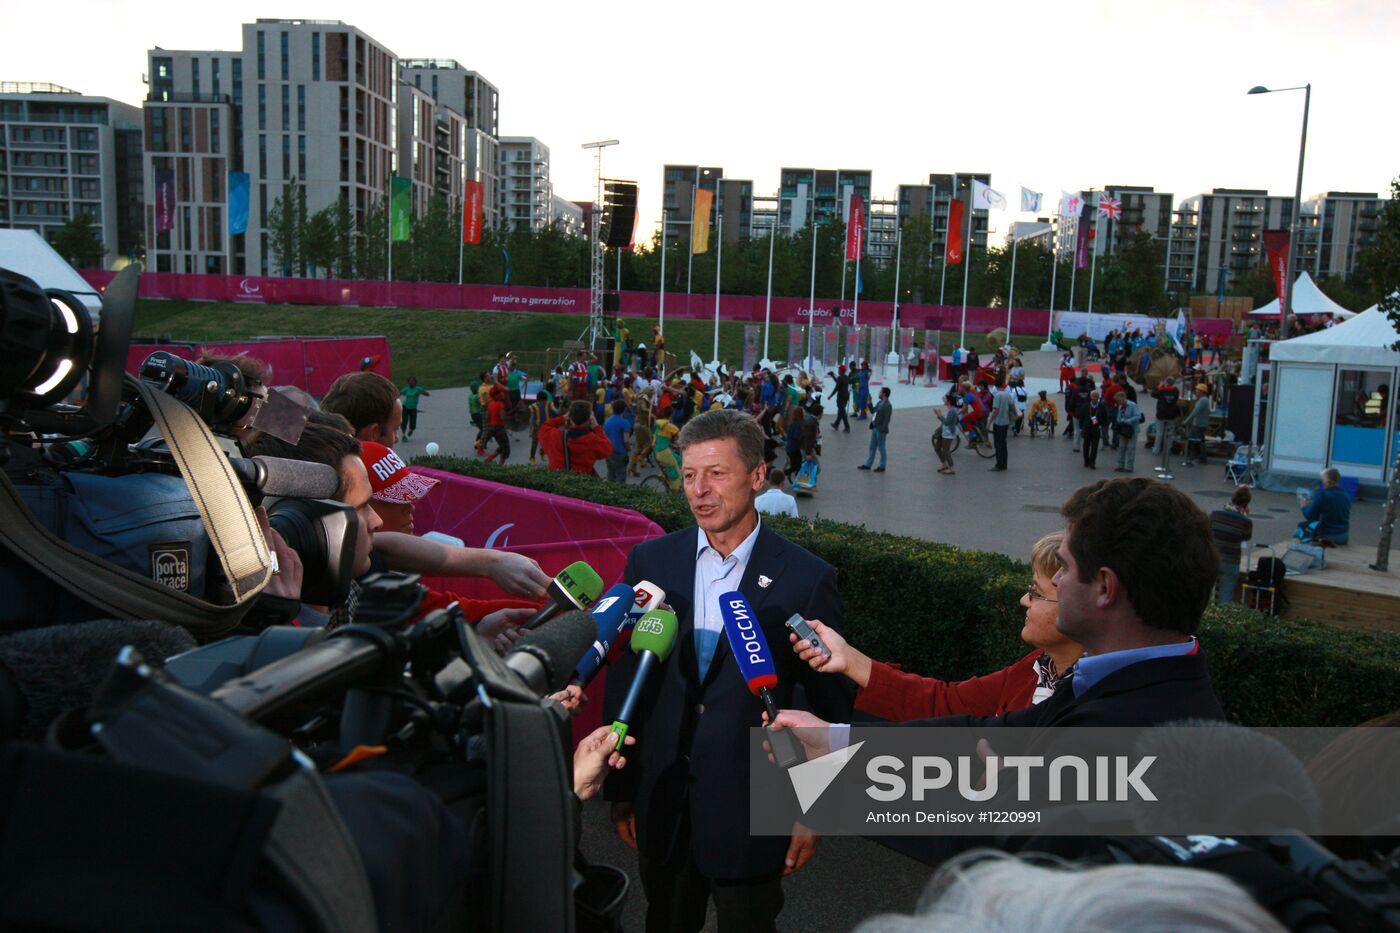 Russian flag raising ceremony in the Paralympic Village